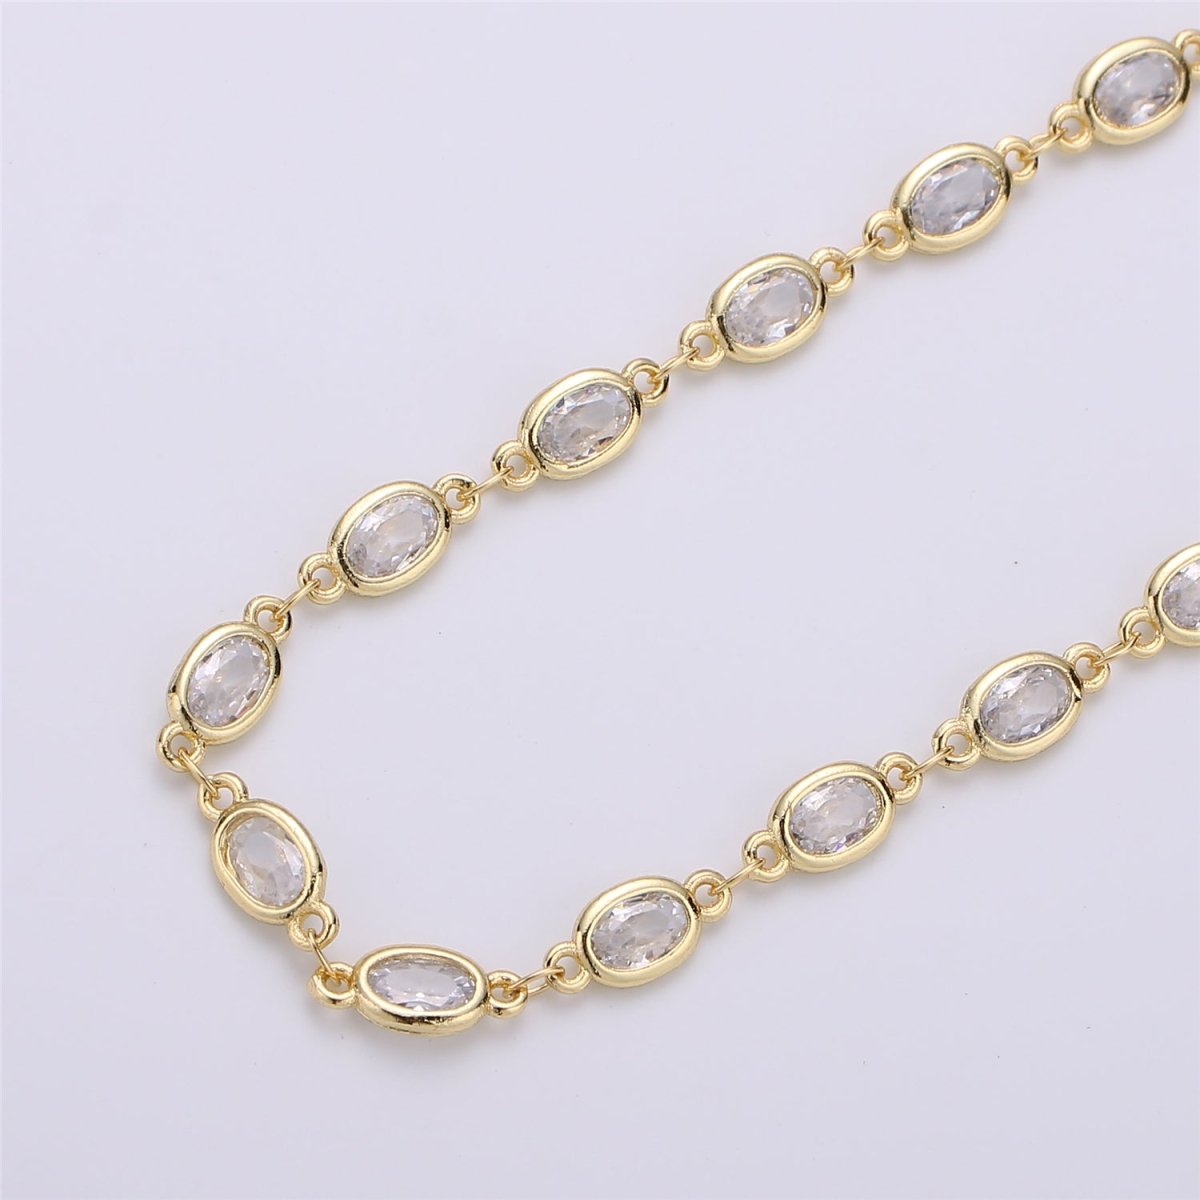 OS 24K Gold Filled Micro Pave CZ Charm Specialty Link Chain by Yard, CZ Charm Size 11X4mm, White Gold Filled DESIGNED Chain | ROLL-113, ROLL-114 Clearance Pricing - DLUXCA